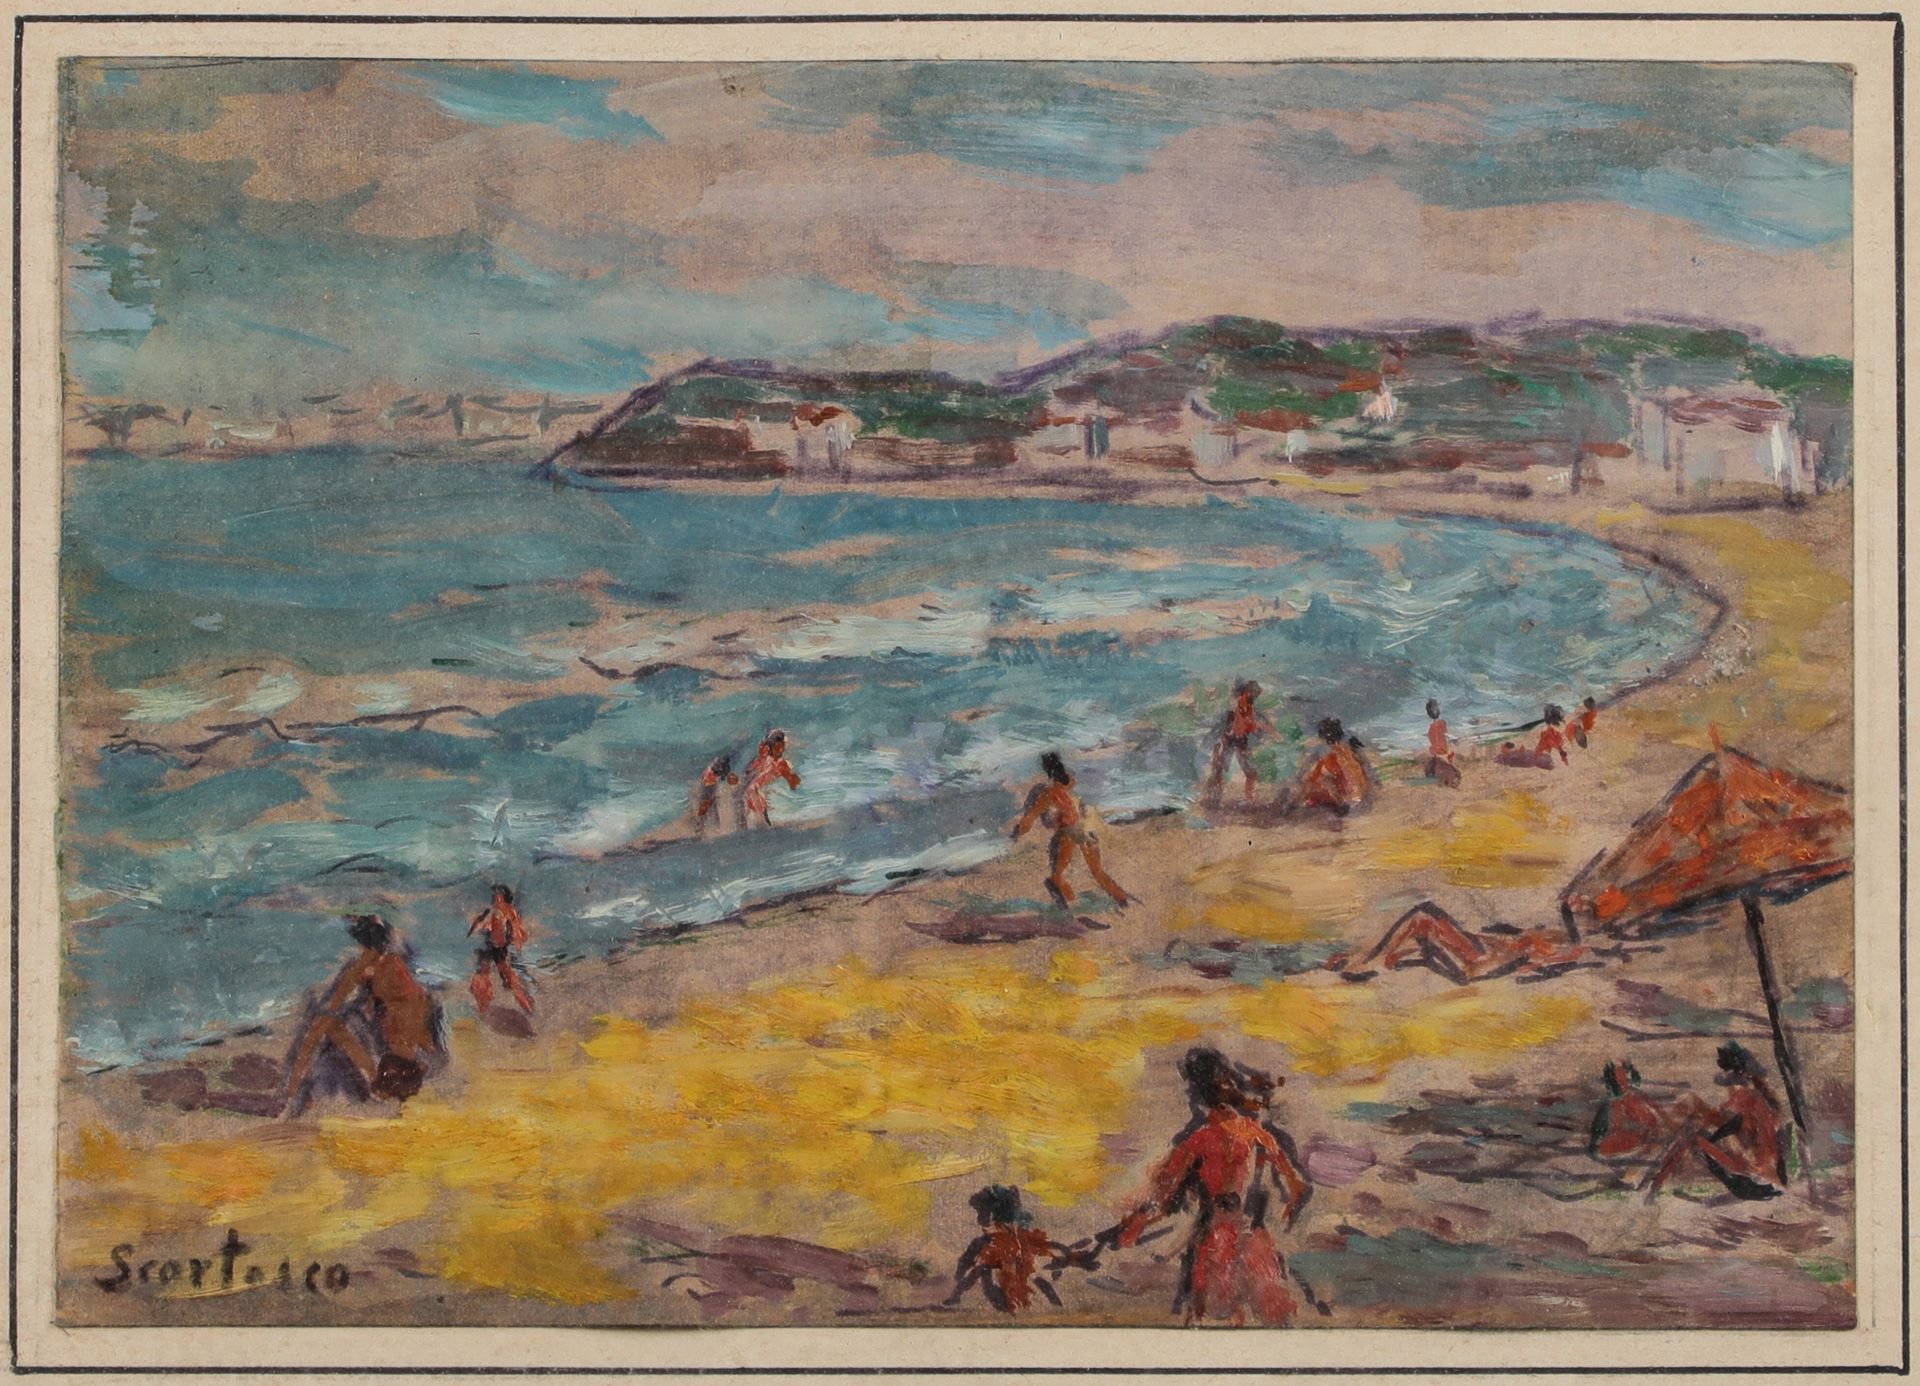 Null Attributed to Paul SCORTESCO (1895-1976)
THE BEACHERS
Watercolor gouache on&hellip;